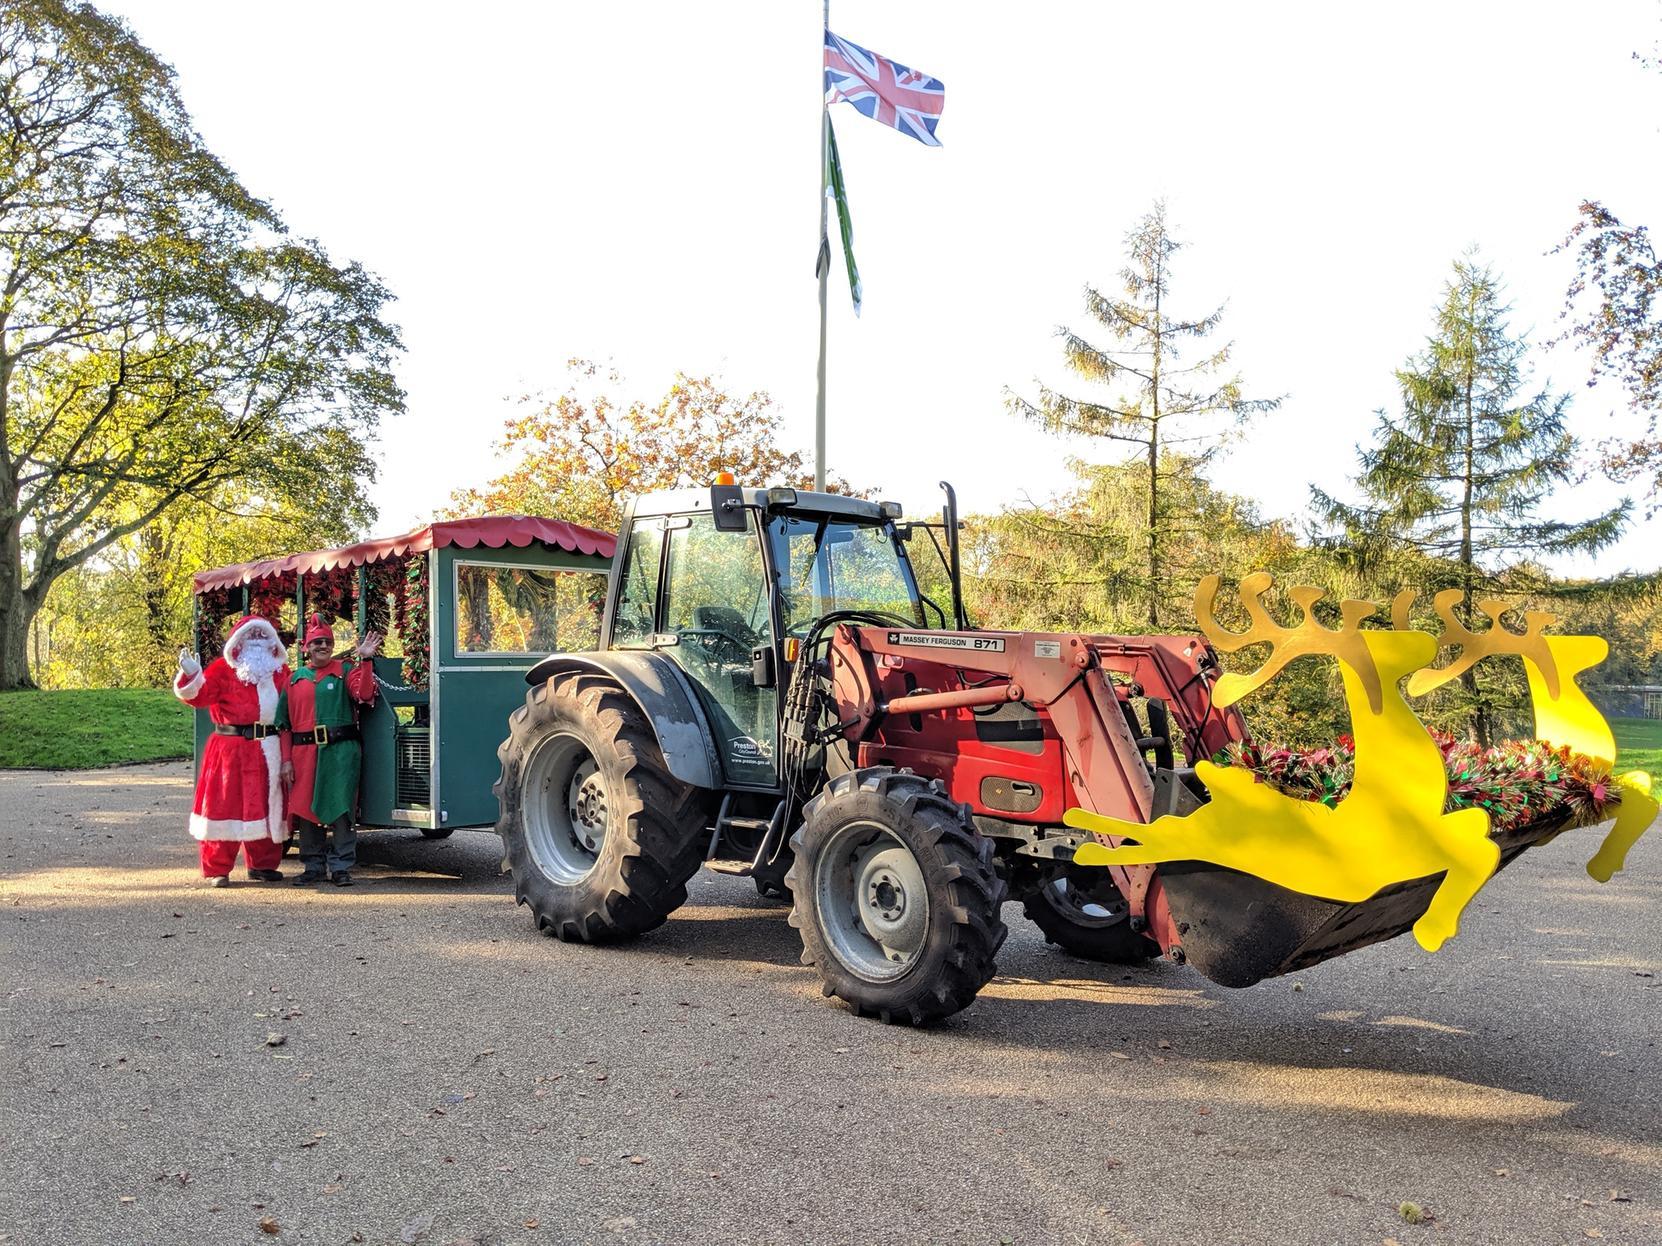 Meet Father Christmas at the South Meadow Lane entrance and take a tractor ride to Santas grotto:December 14, 15, 21 and 22. 10pound per child (plus 3pound adult). Filling up so book on 01772 906471